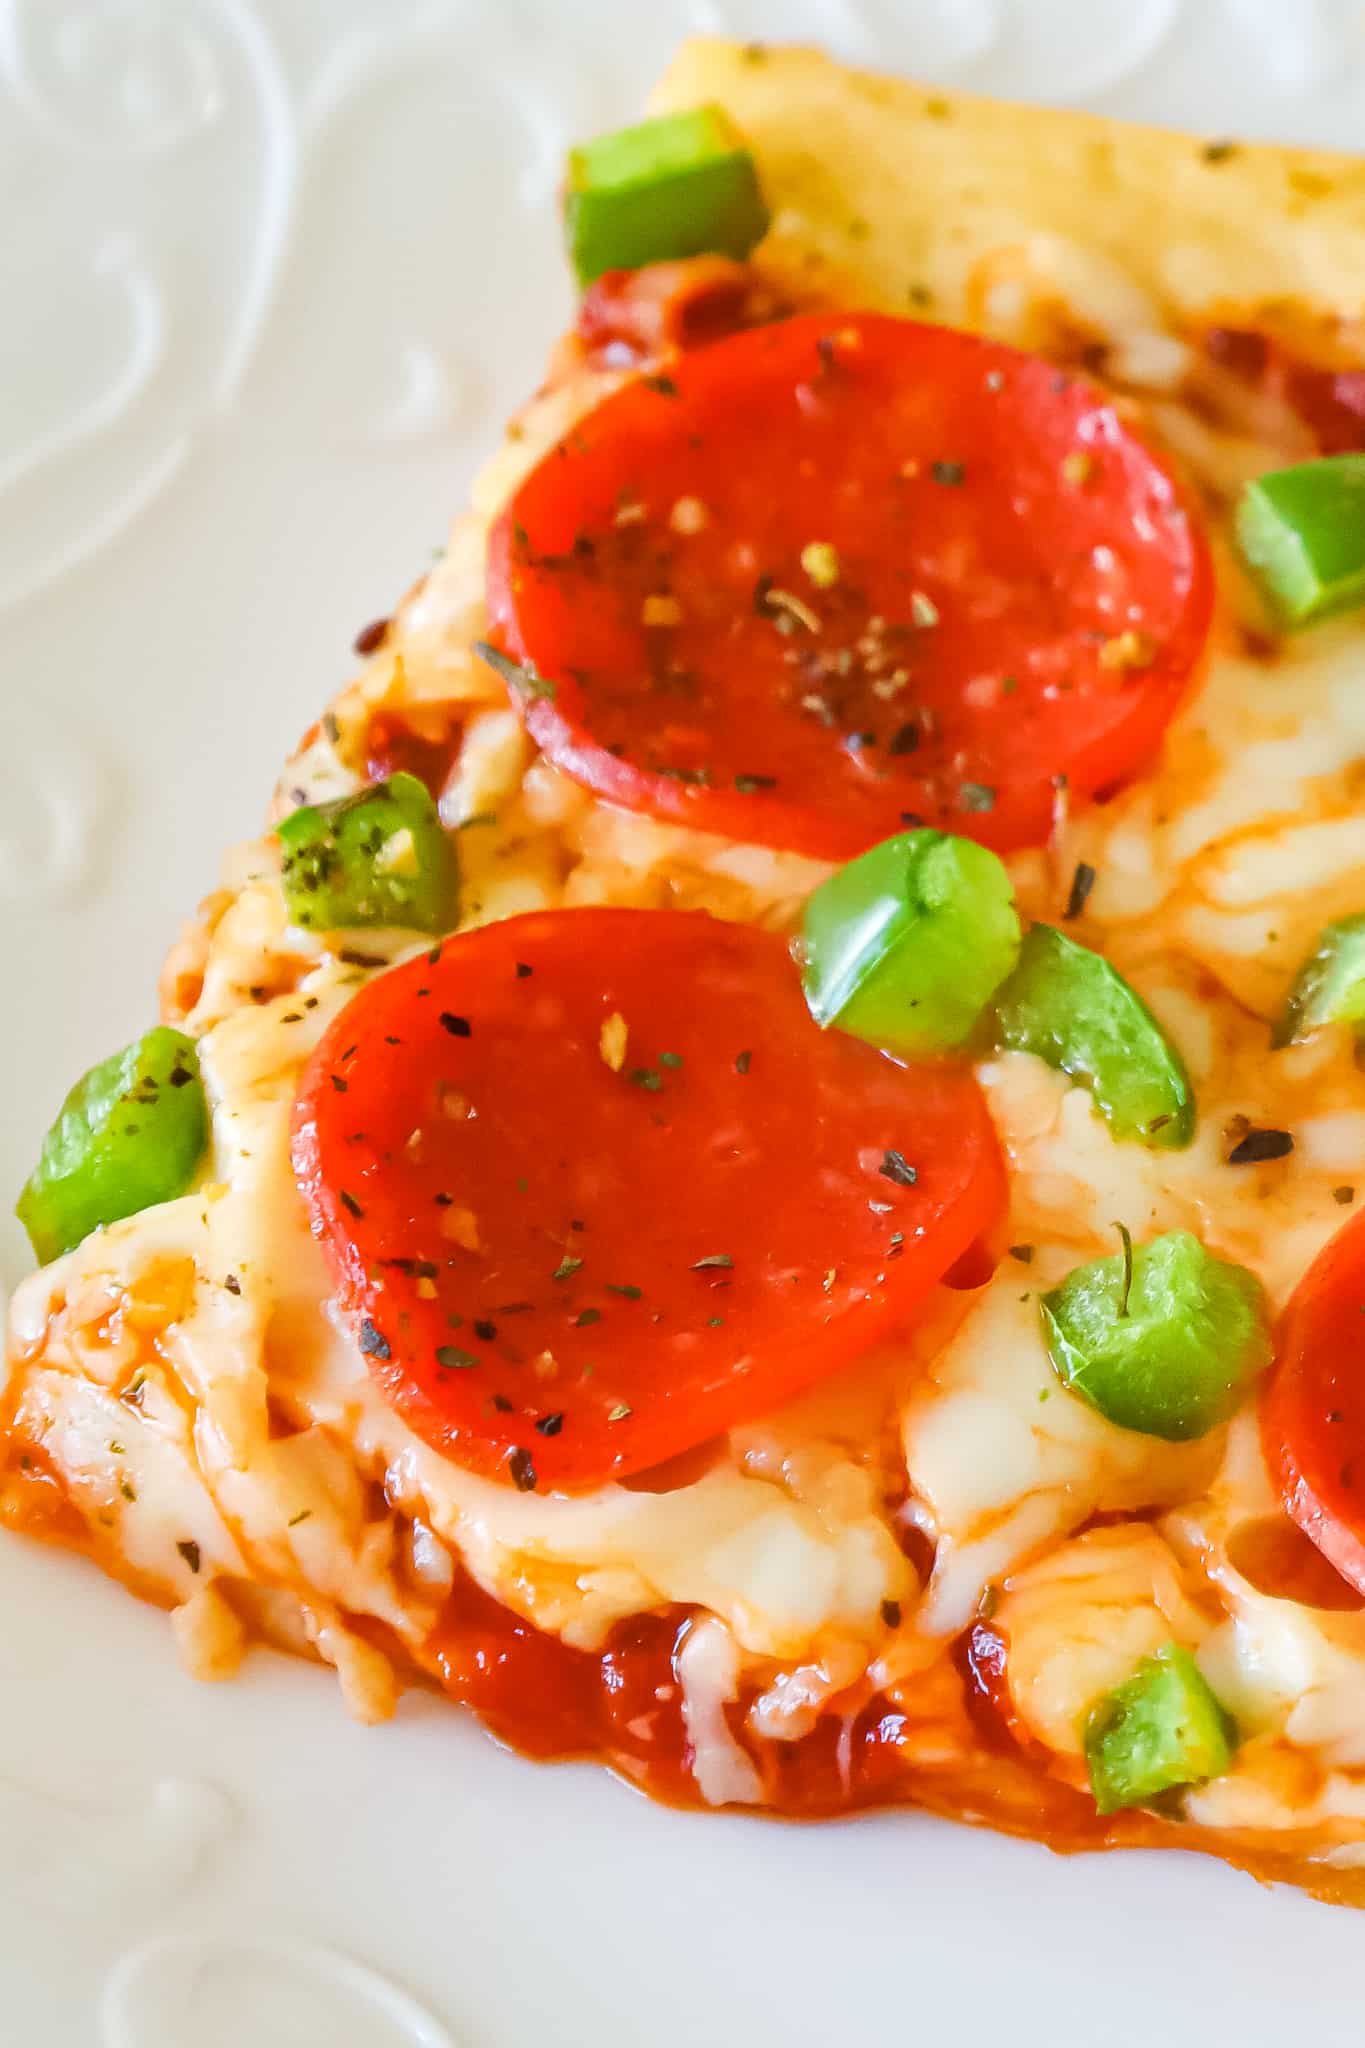 Crescent Roll Pizza is an easy weeknight dinner recipe using a can of Pillsbury crescent dough topped with pizza sauce, shredded mozzarella cheese, pepperoni and diced green peppers.